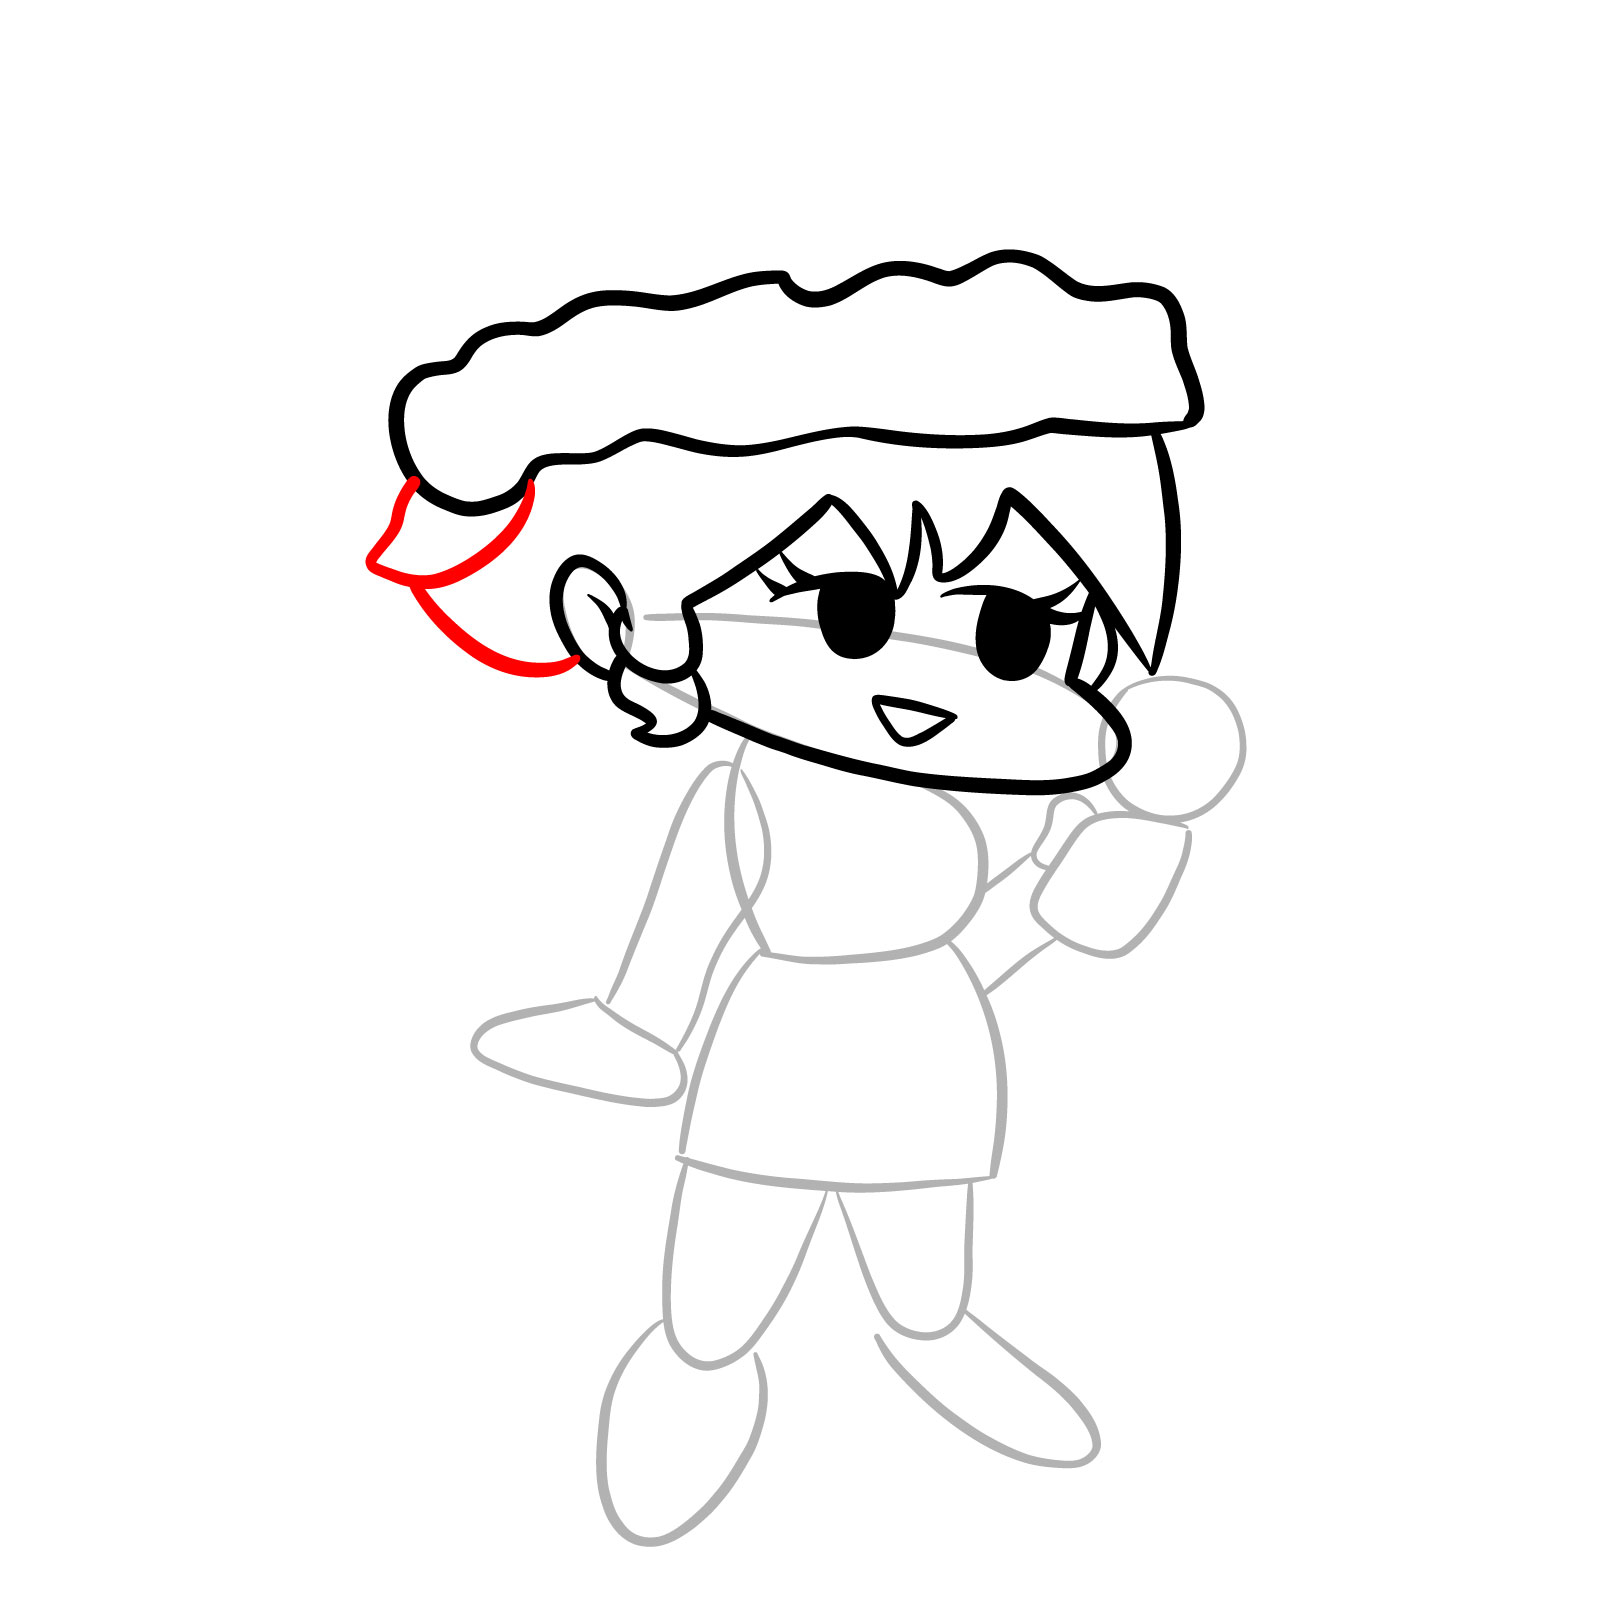 How to draw standing Santa GF - step 11